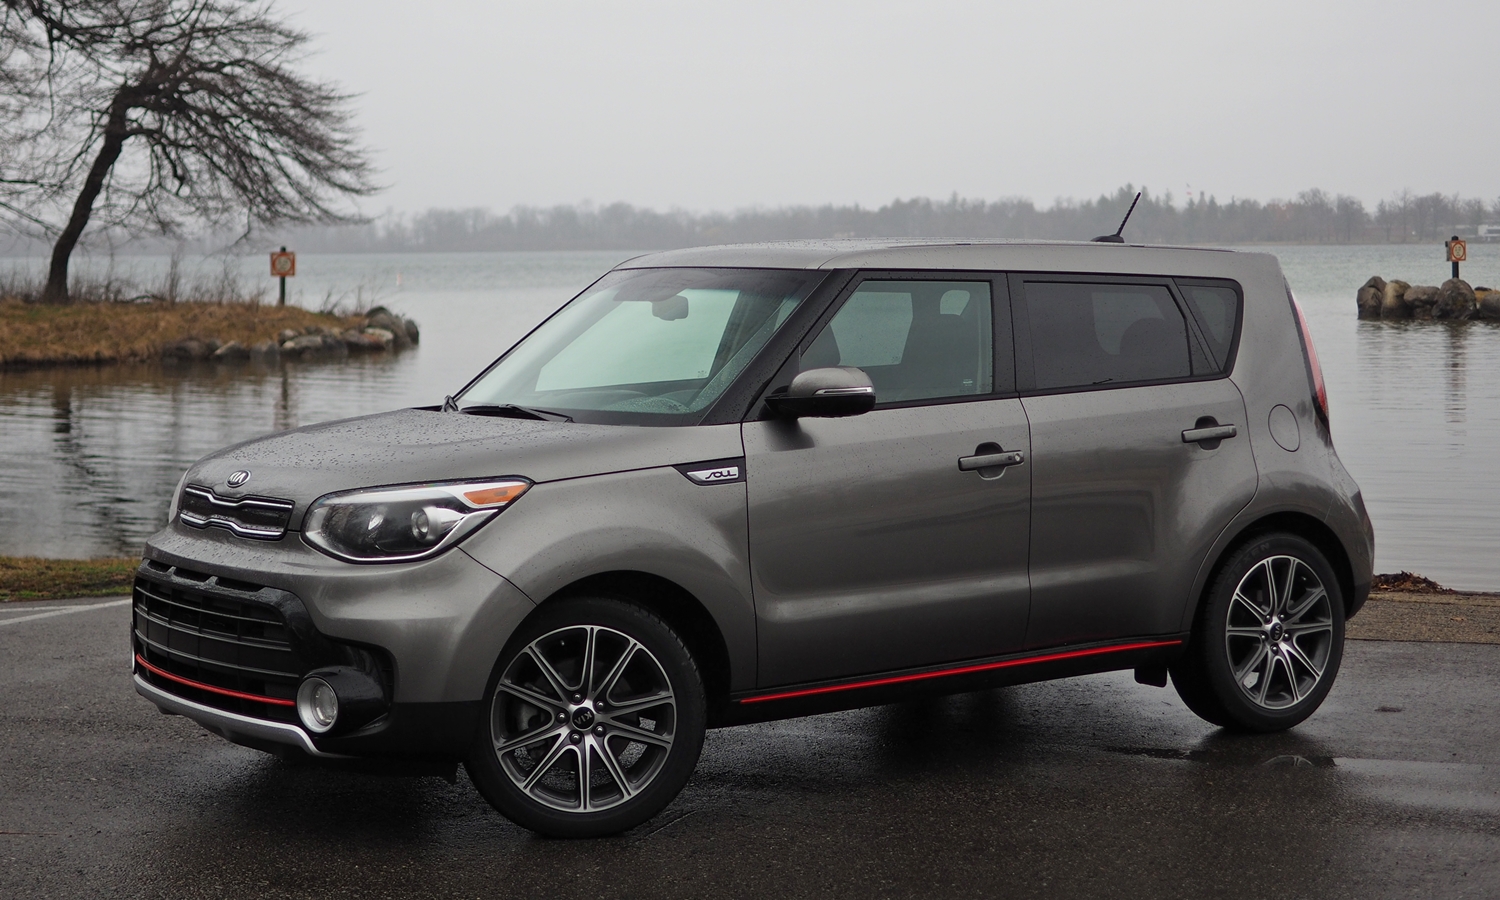 2017 Kia Soul Pros and Cons at TrueDelta: 2017 Kia Soul 1.6T Review by ...